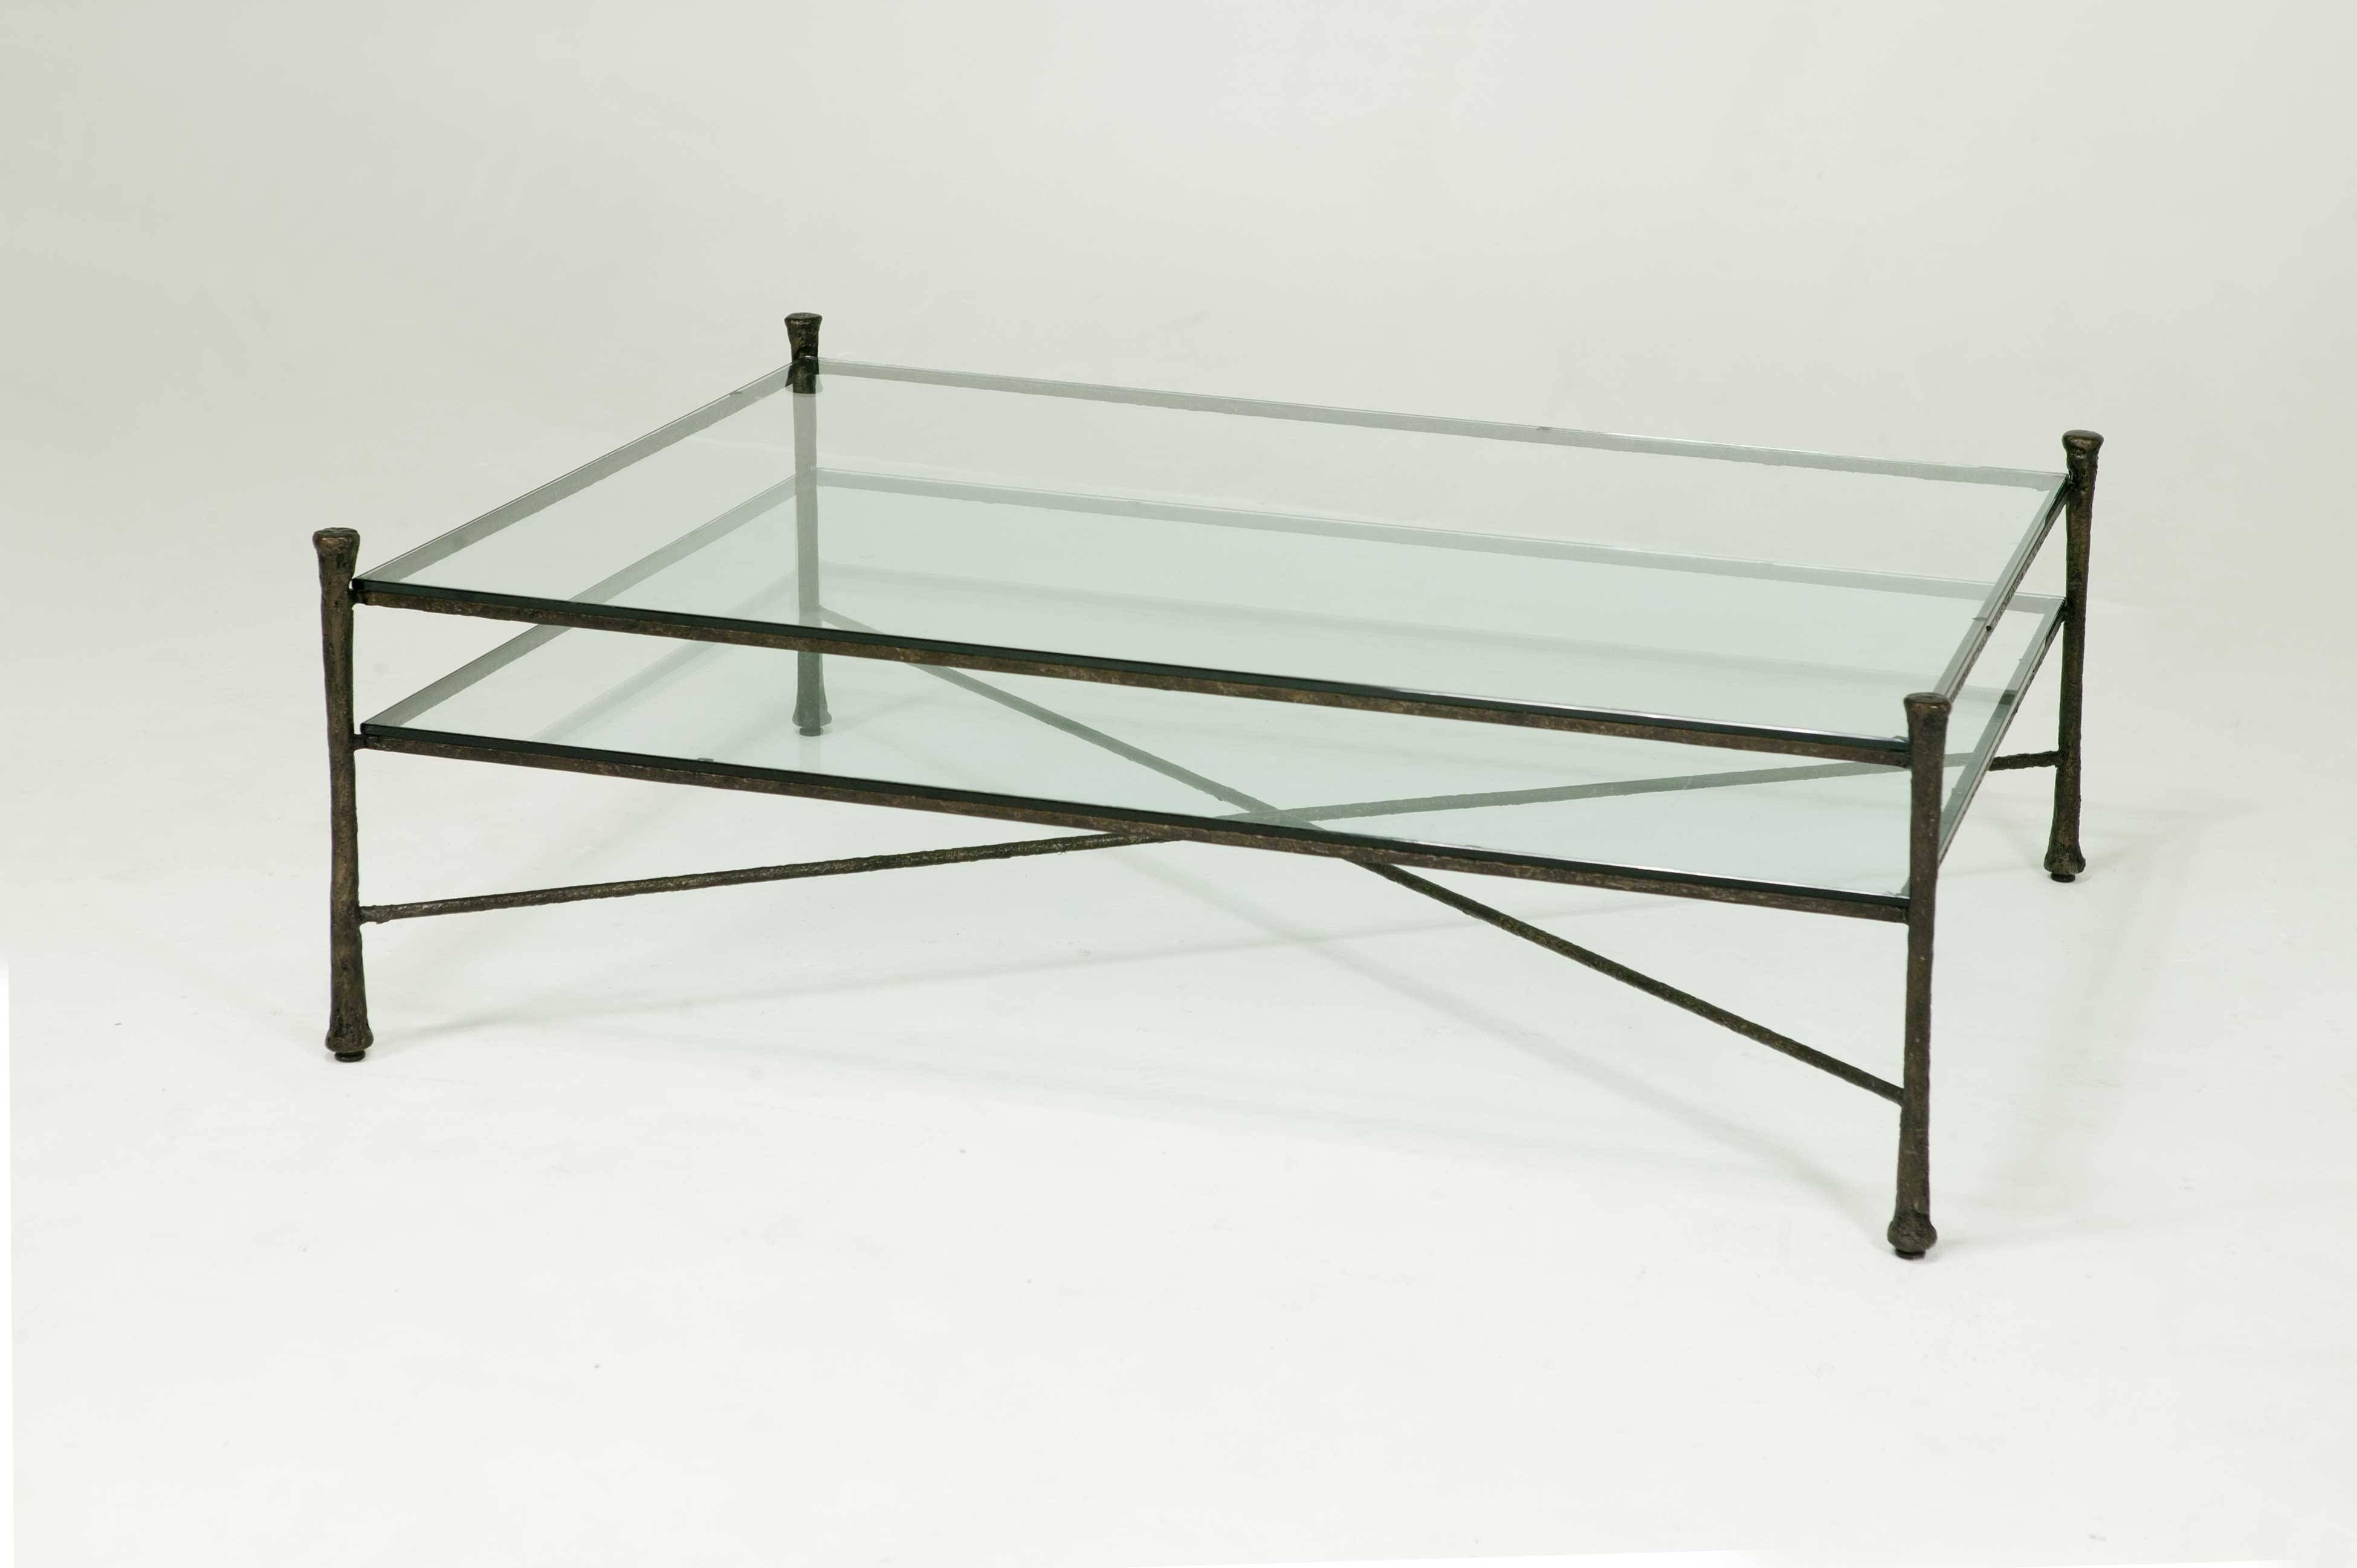 Black Metal Coffee Table With Glass Top | Coffee Tables Decoration Within Large Square Glass Coffee Tables (View 17 of 30)